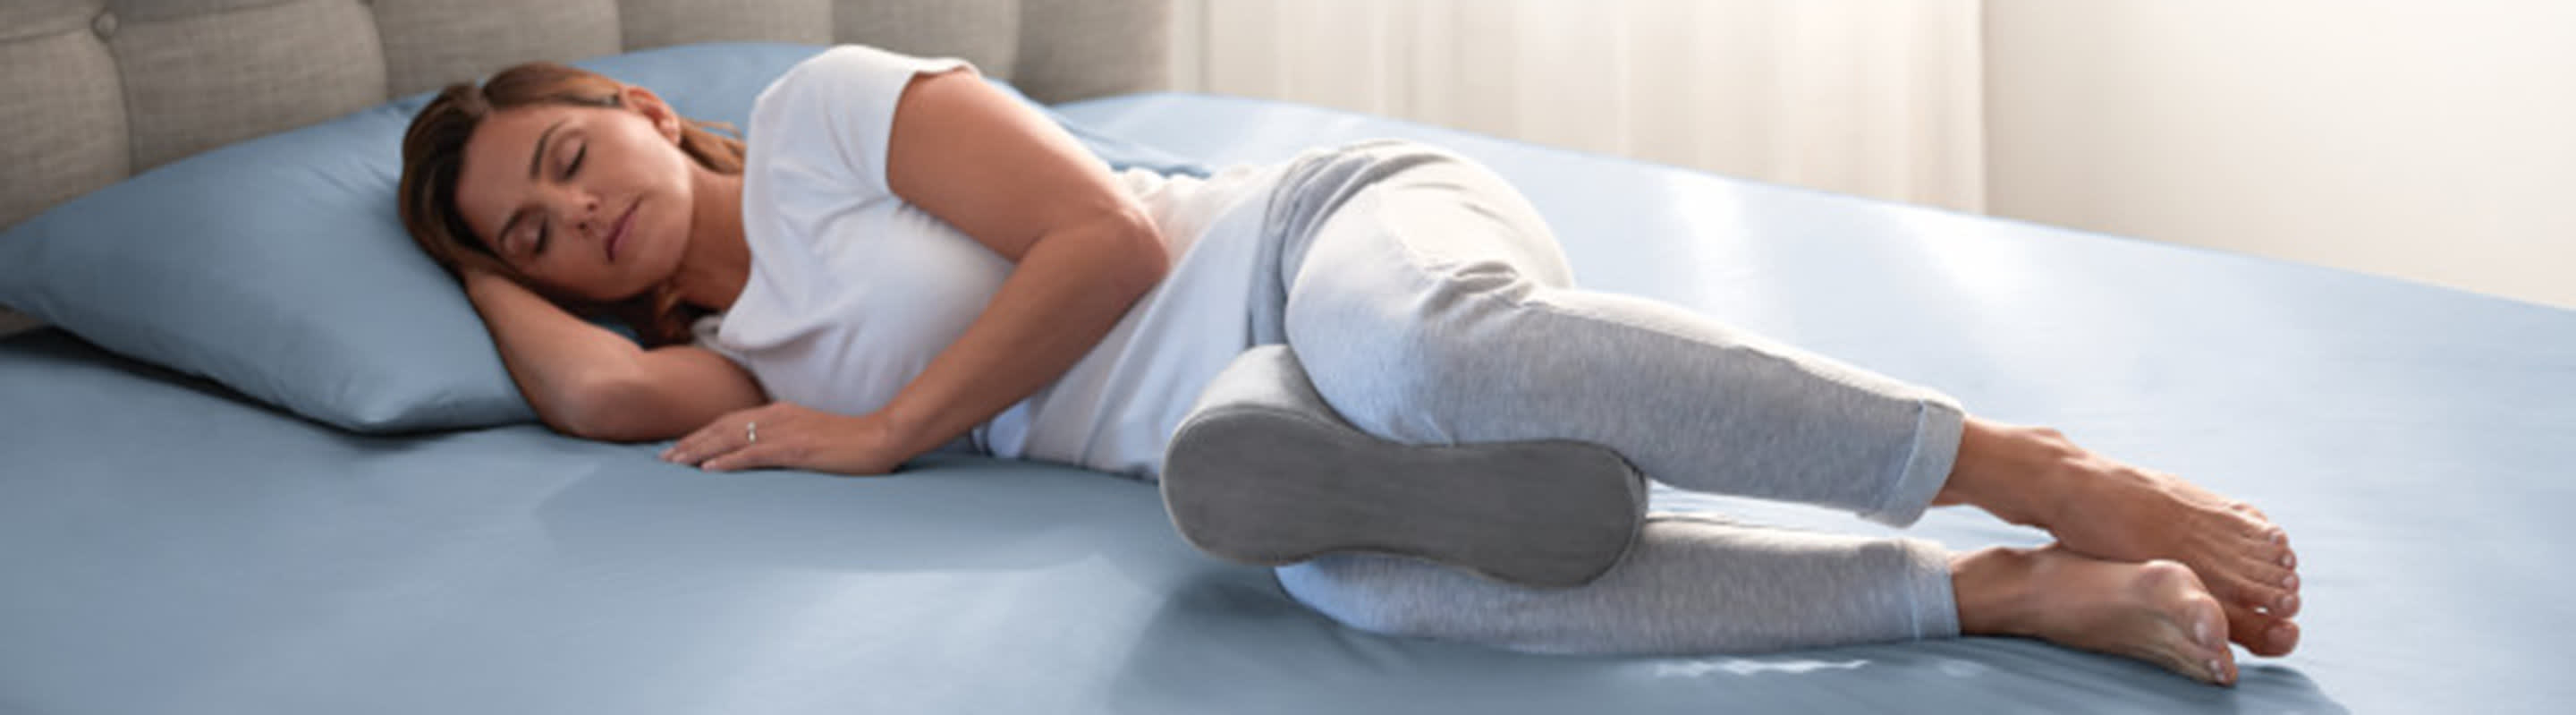 Should I sleep with a pillow between my legs? Experts reveal